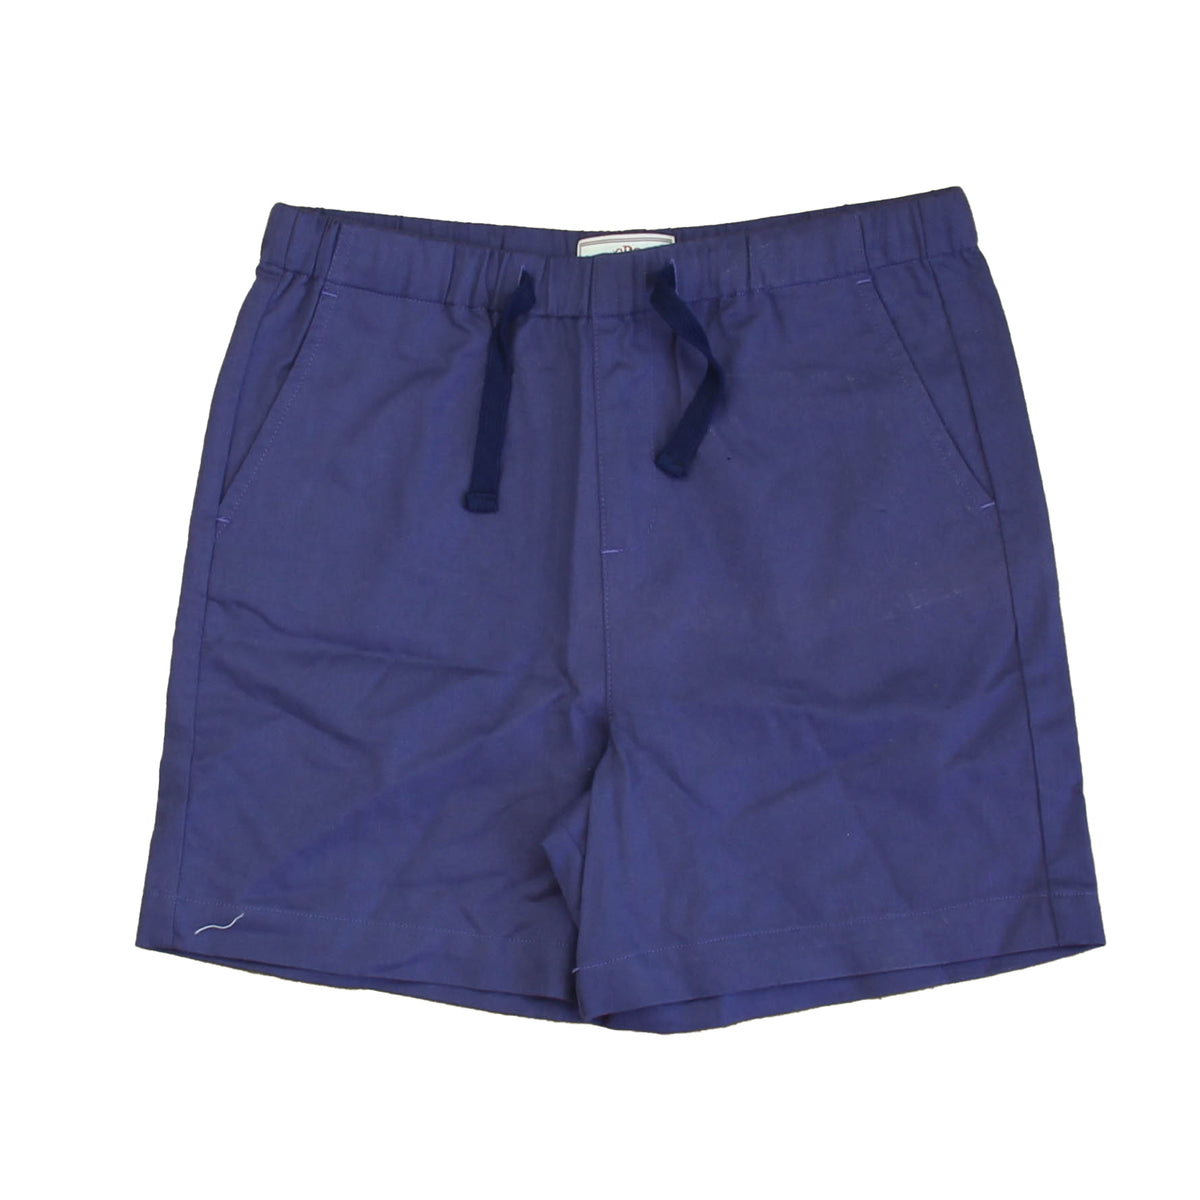 New with Tags: Navy Shorts -- FINAL SALE